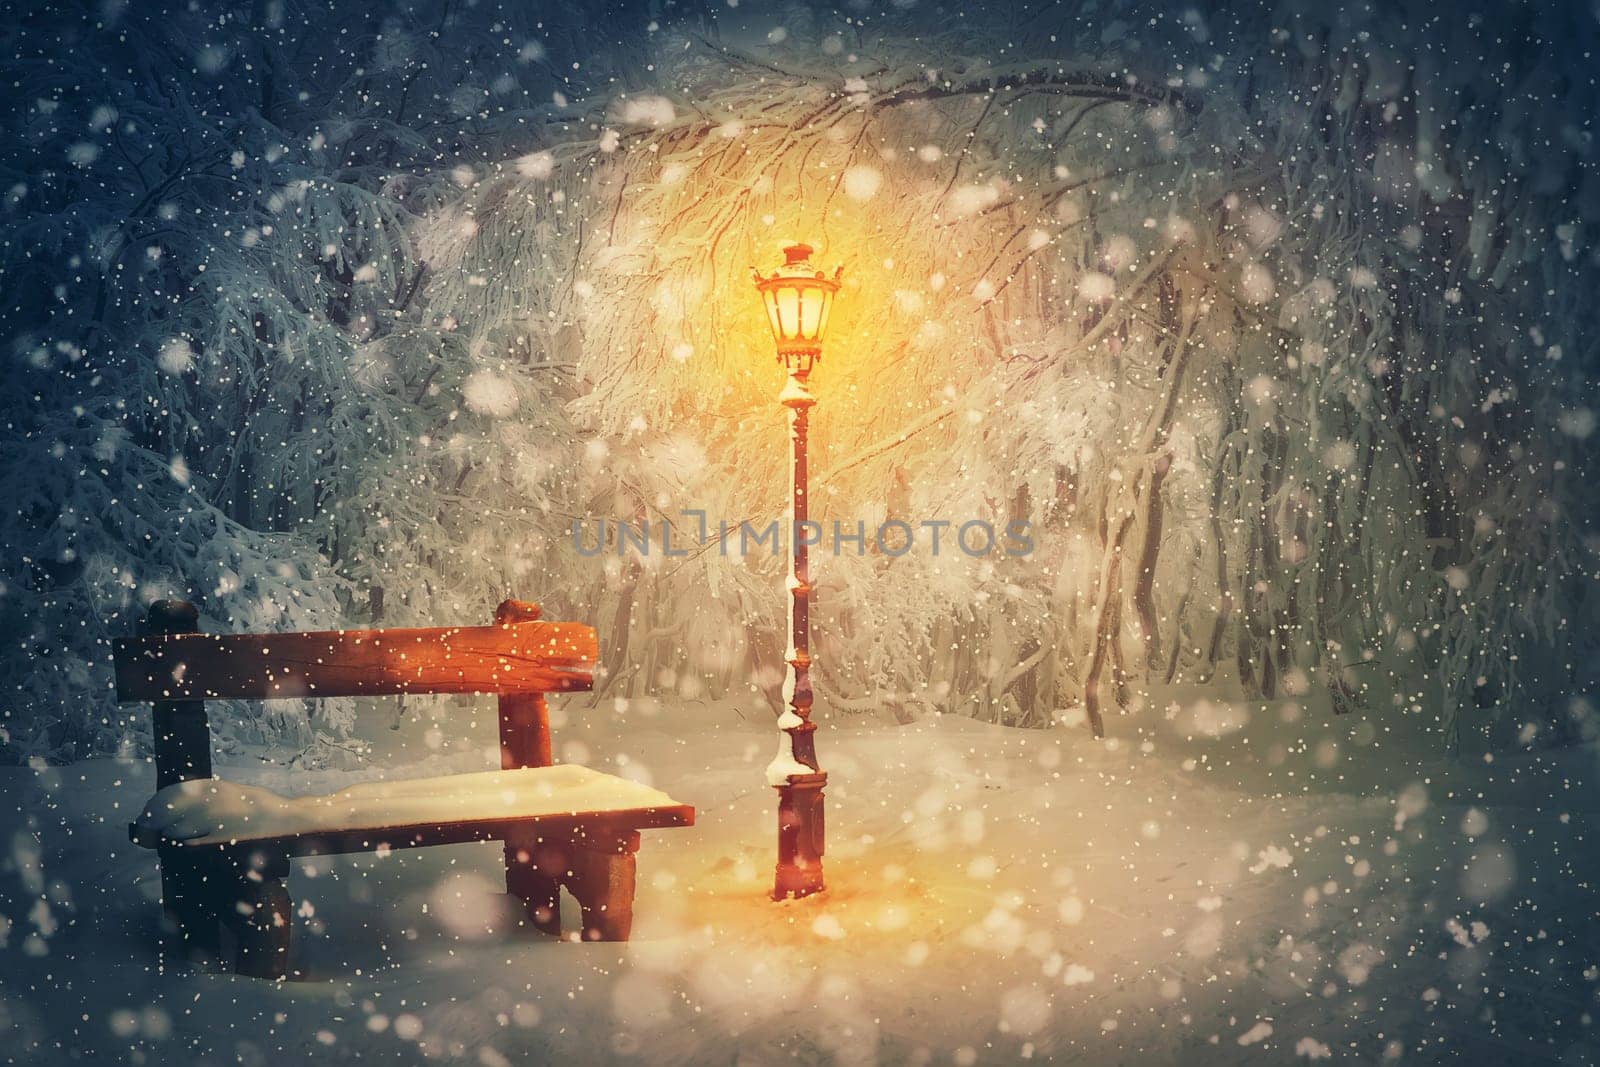 Wintertime night scene in the park. Shining street lamp near a wooden bench covered with snow. Wonderful winter holidays seasonal background. Christmas Eve and New year magic Noel atmosphere